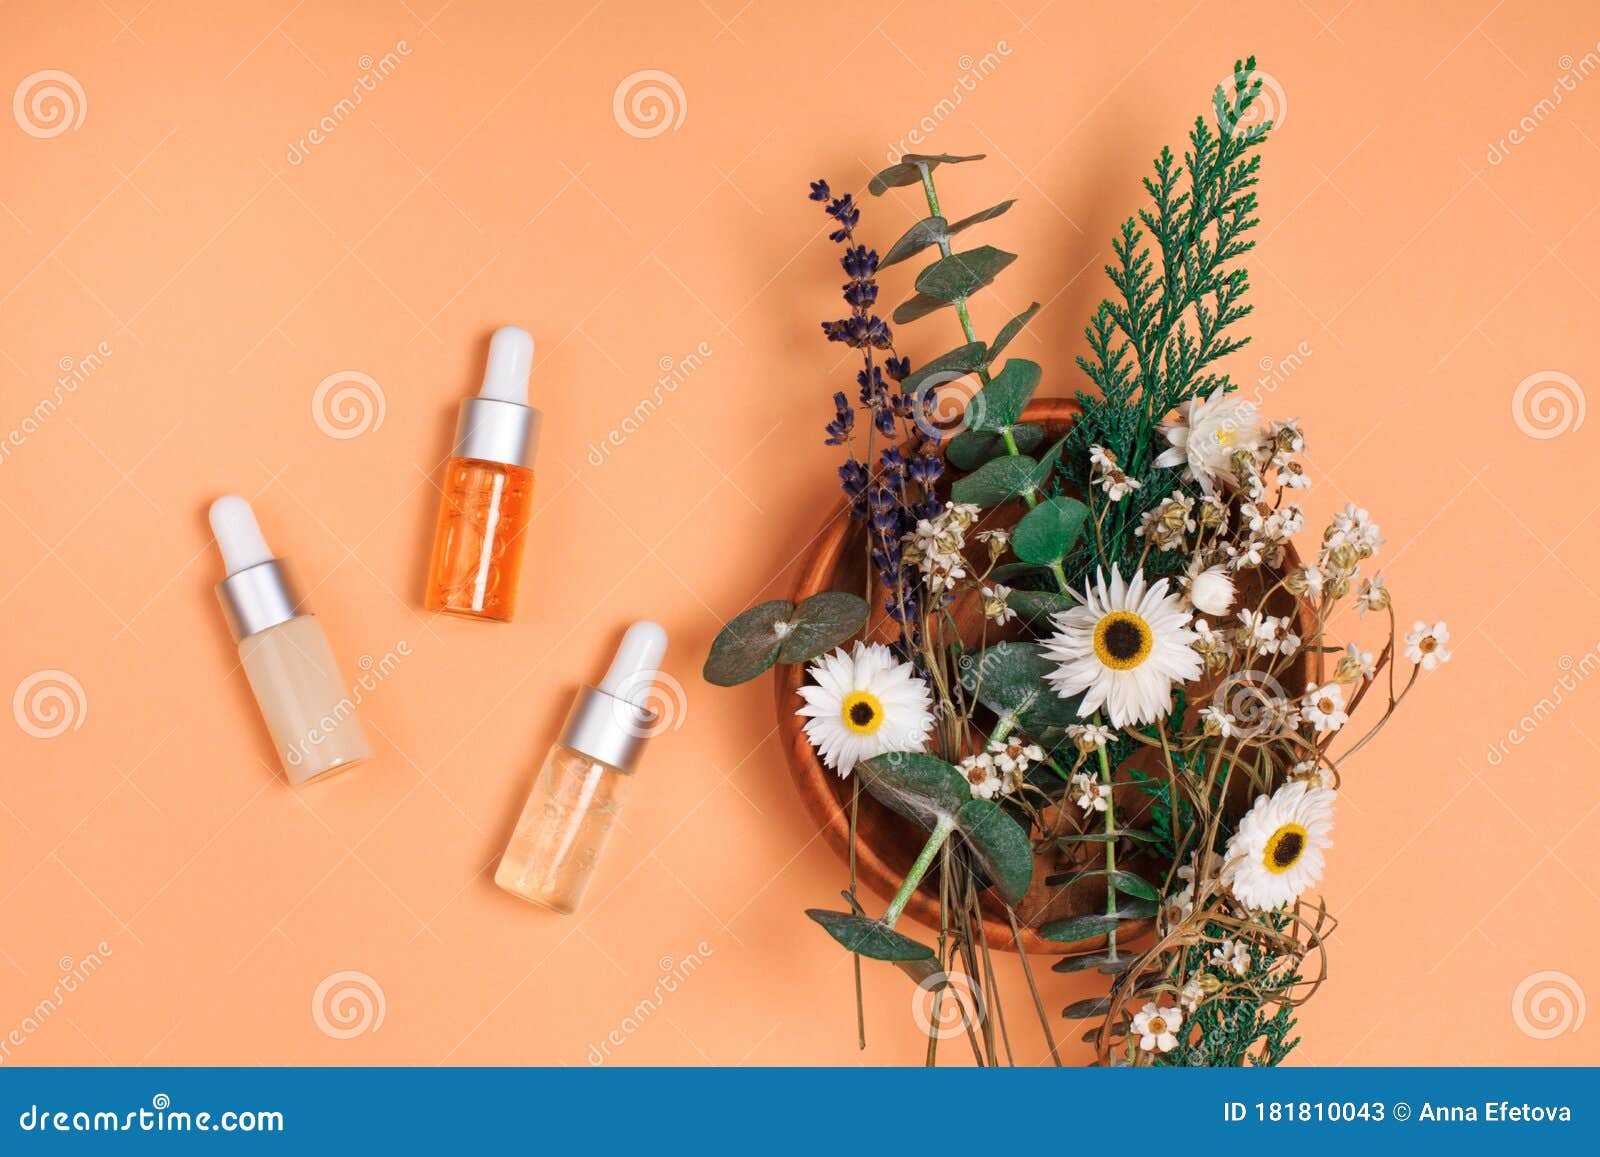 Modern Apothecary Concept Stock Image Image Of Green 181810043